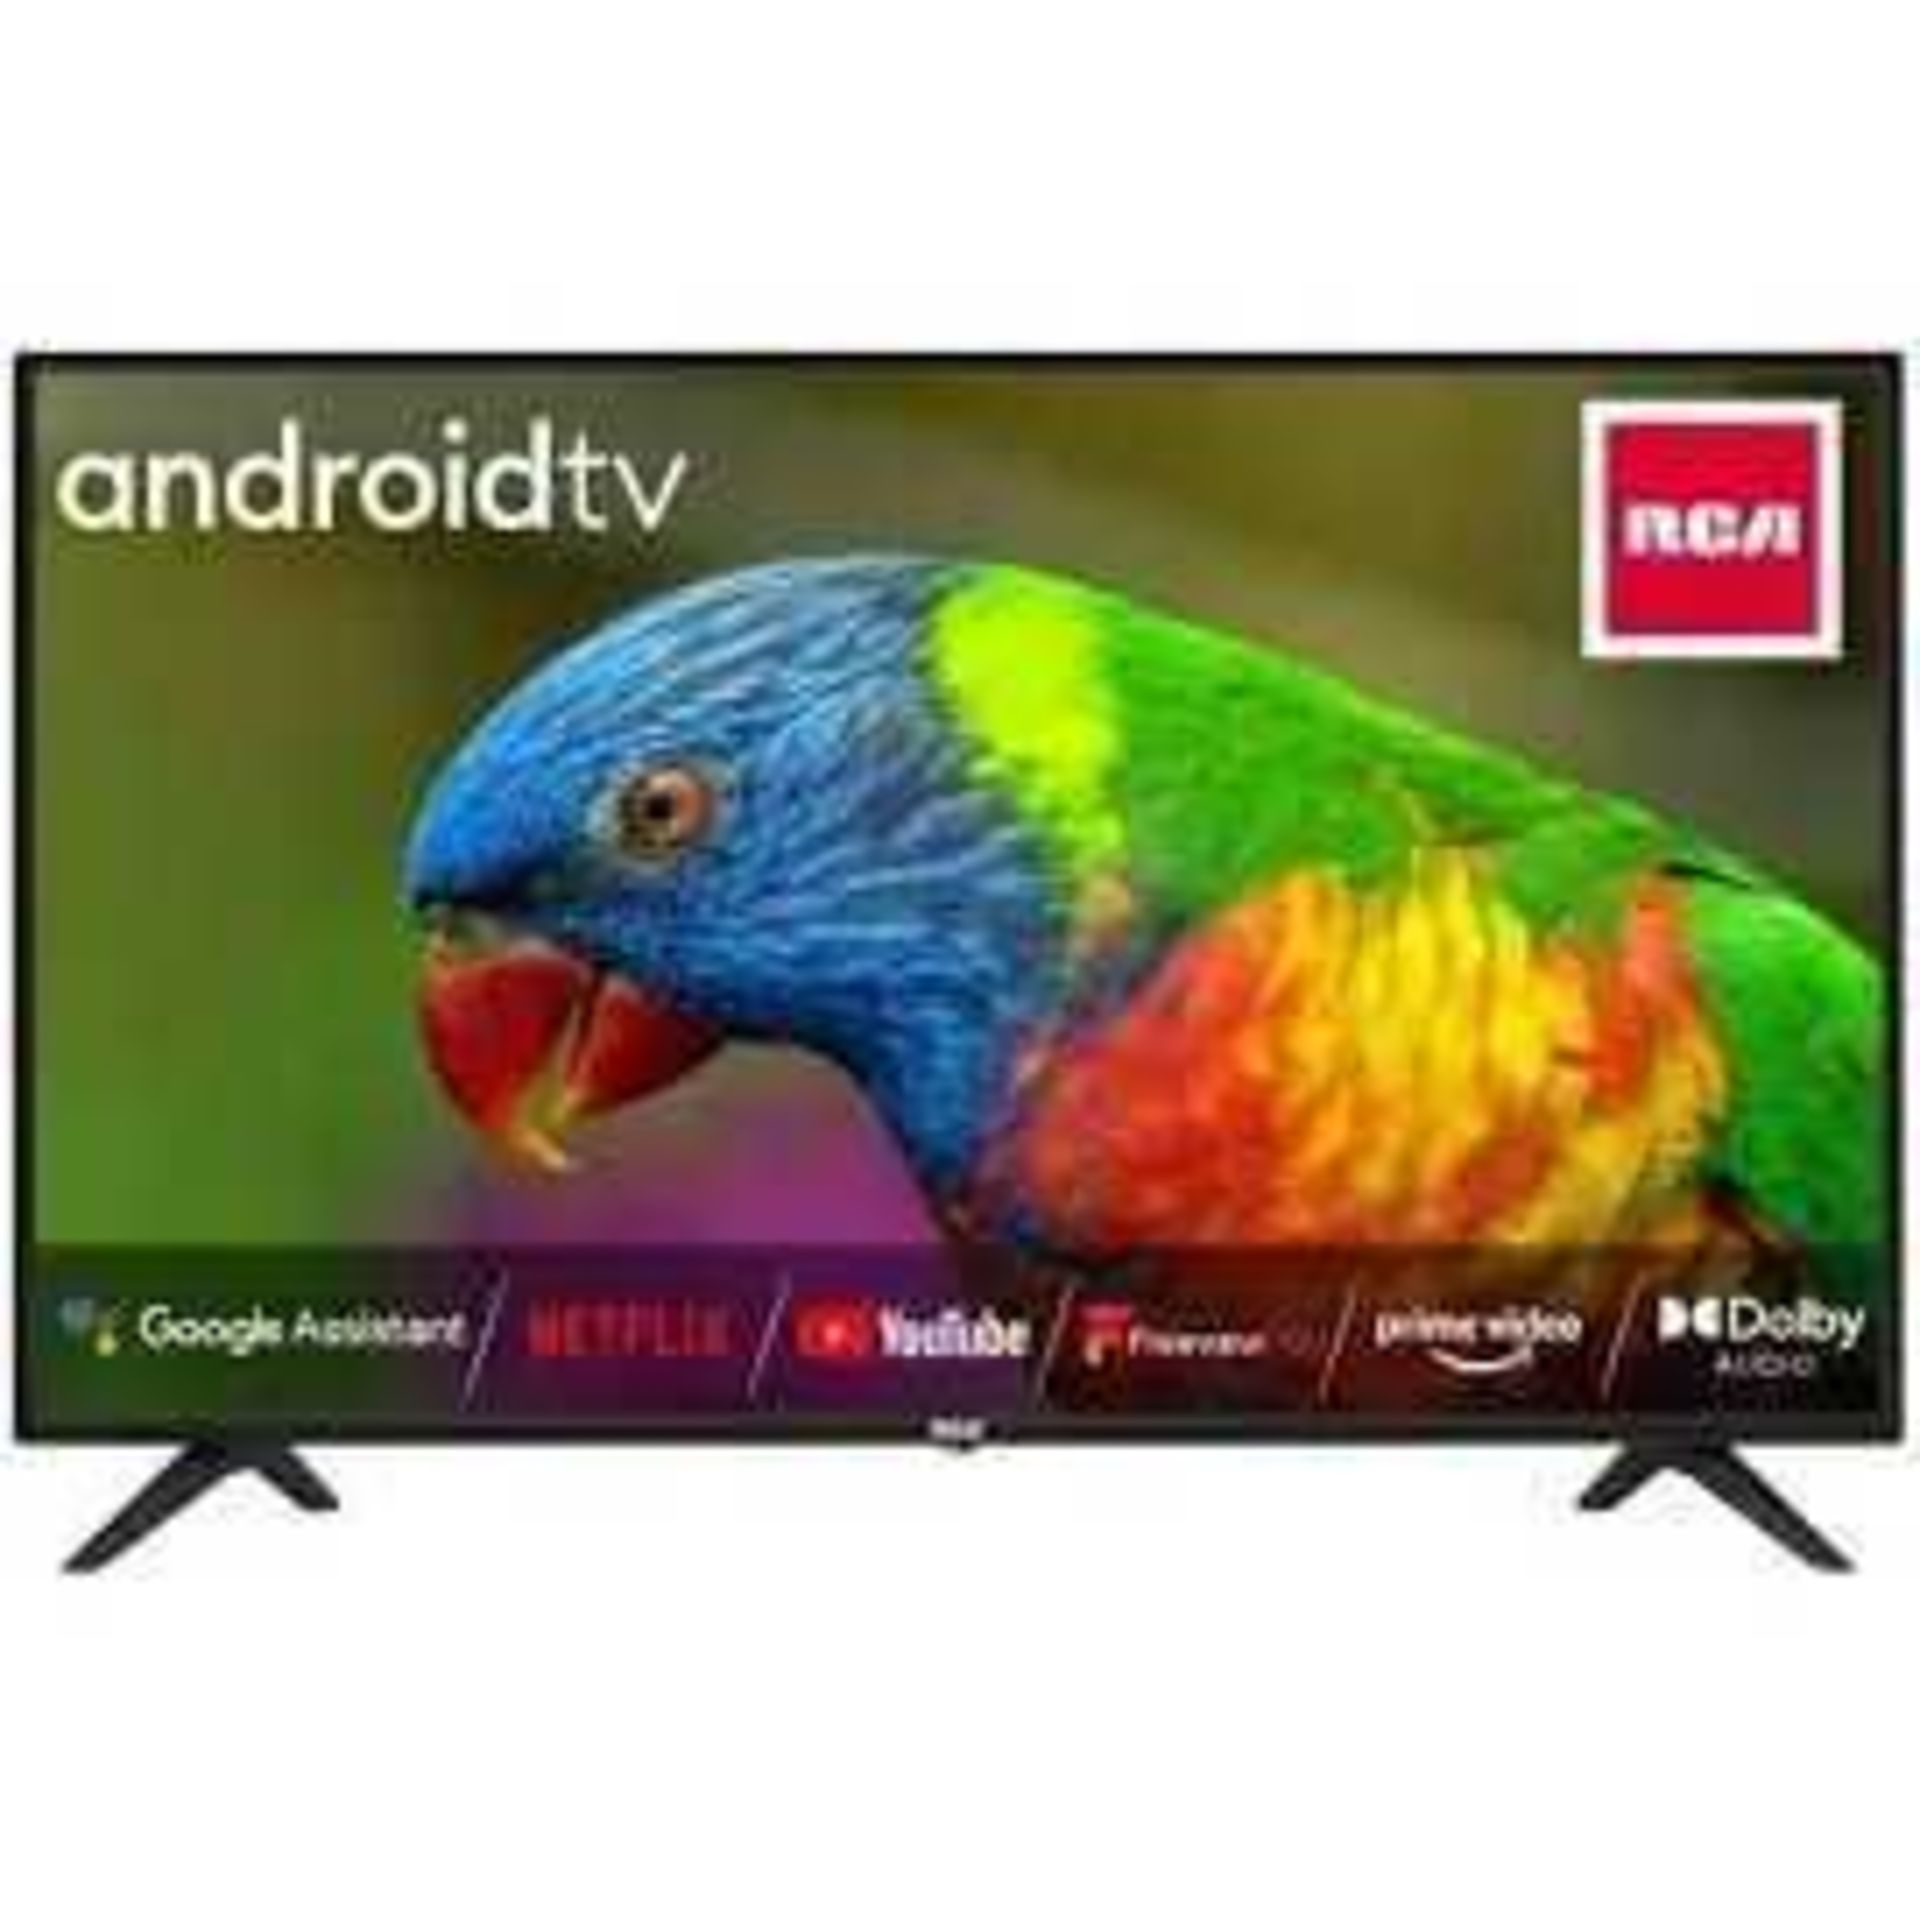 RRP £300 A Boxed Rca 43" Android Tv